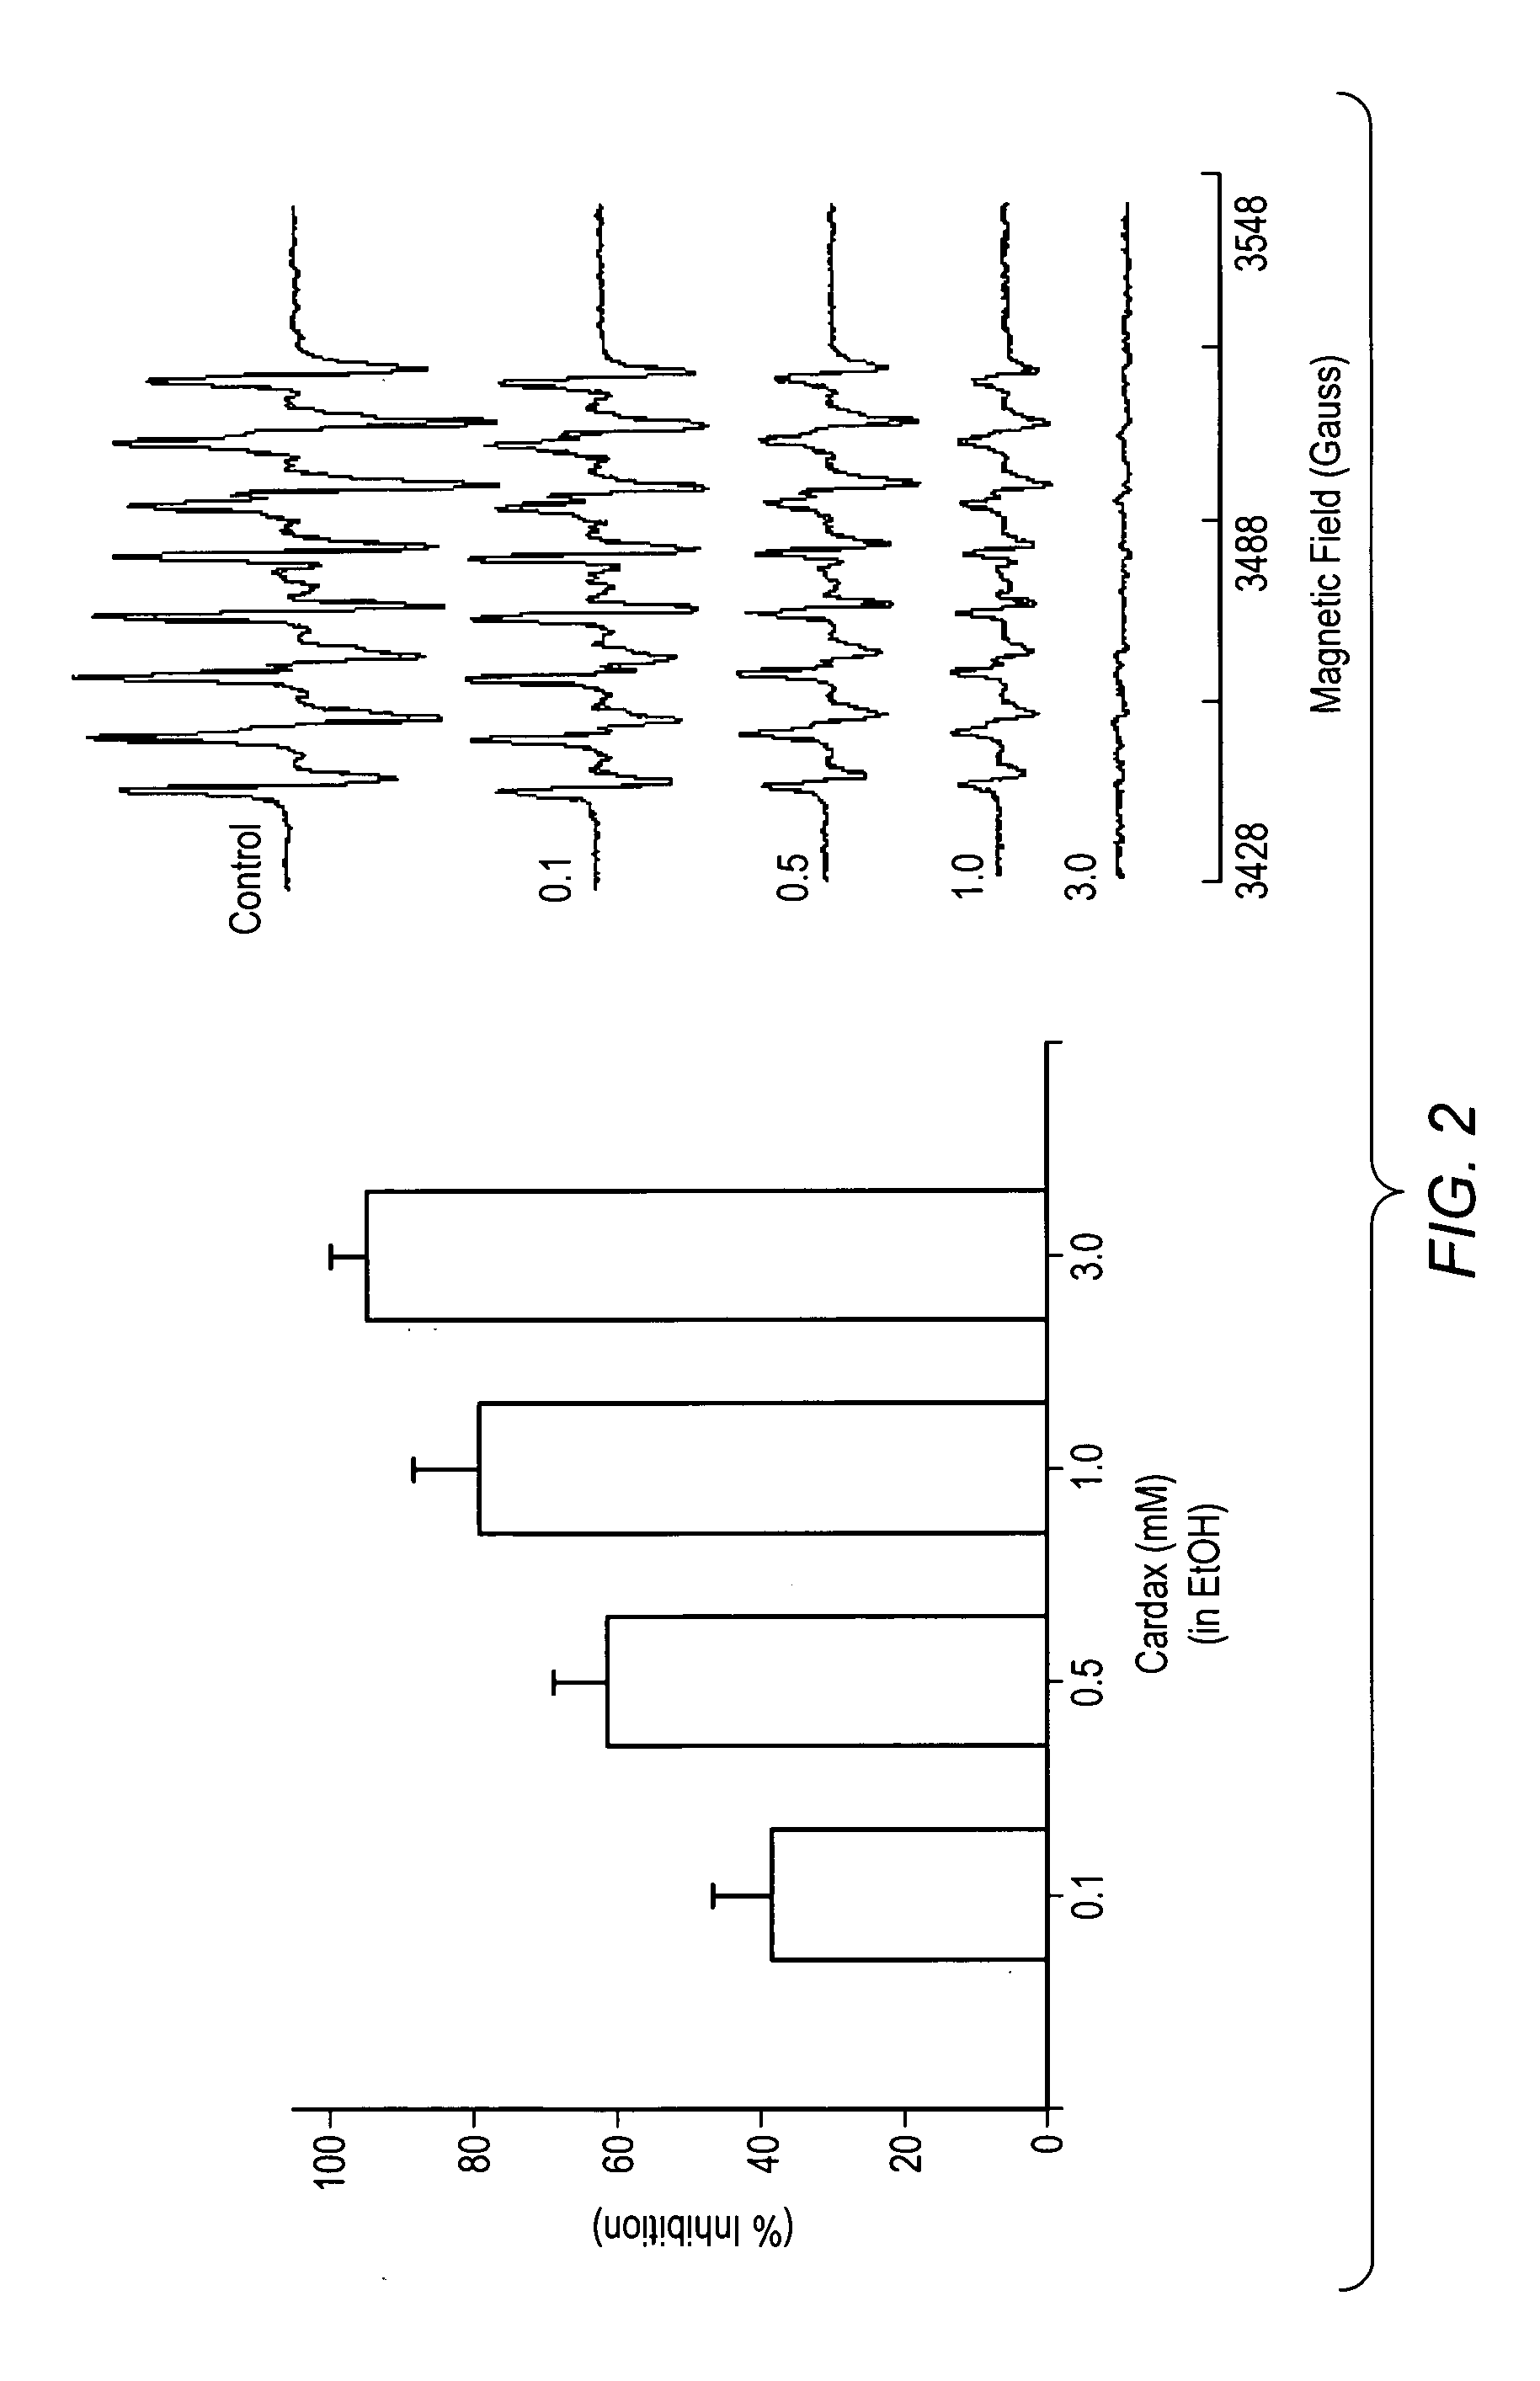 Carotenoid ether analogs or derivatives for controlling C-reactive protein levels